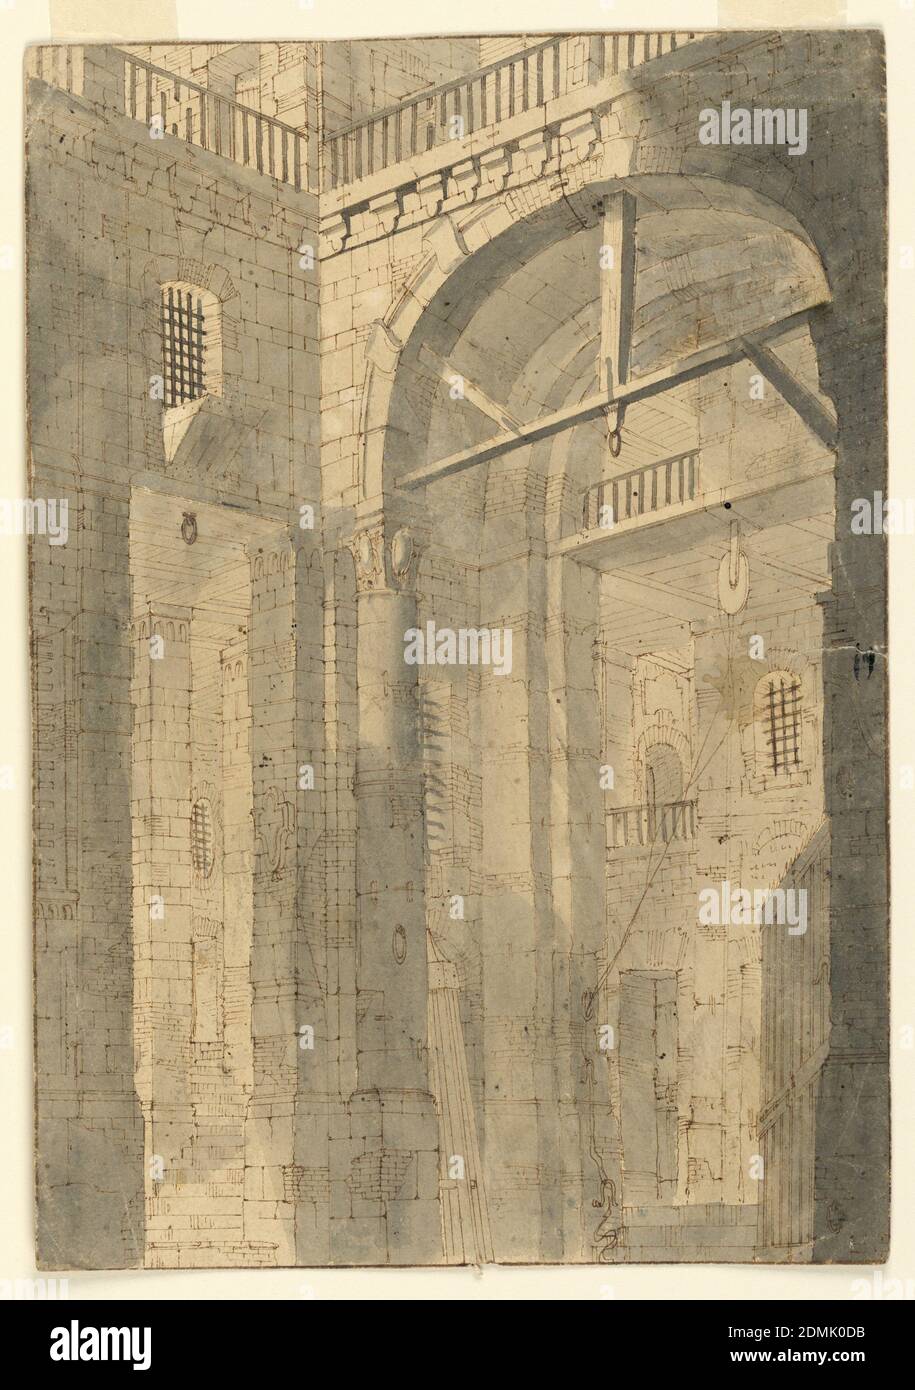 Stage Design, Prison Hall, Pen and brown ink, brush and sepia wash on paper, Vertical rectangle. Immense high prison hall with barred windows, gallery around top, stairs leading up at left and right, winch with rope at right., Italy, 18th century, theater, Drawing Stock Photo